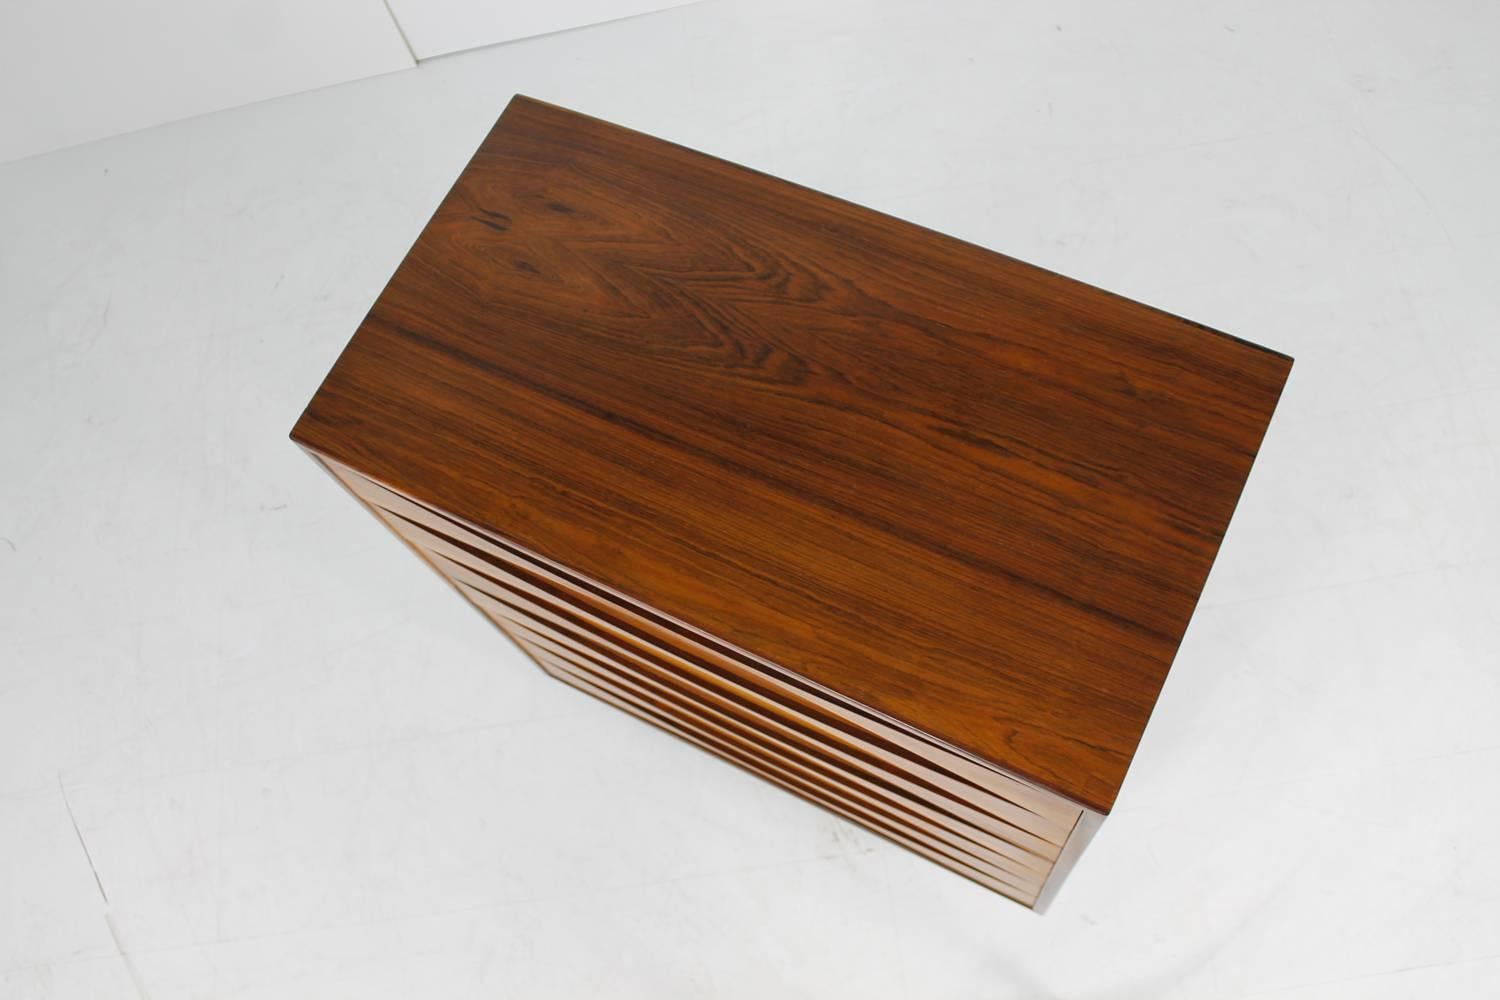 Beautiful Danish modern design Arne Vodder chest of seven drawers in a very good condition. This is a very rare model in authentic condition, from the 1960s Danish modern design.